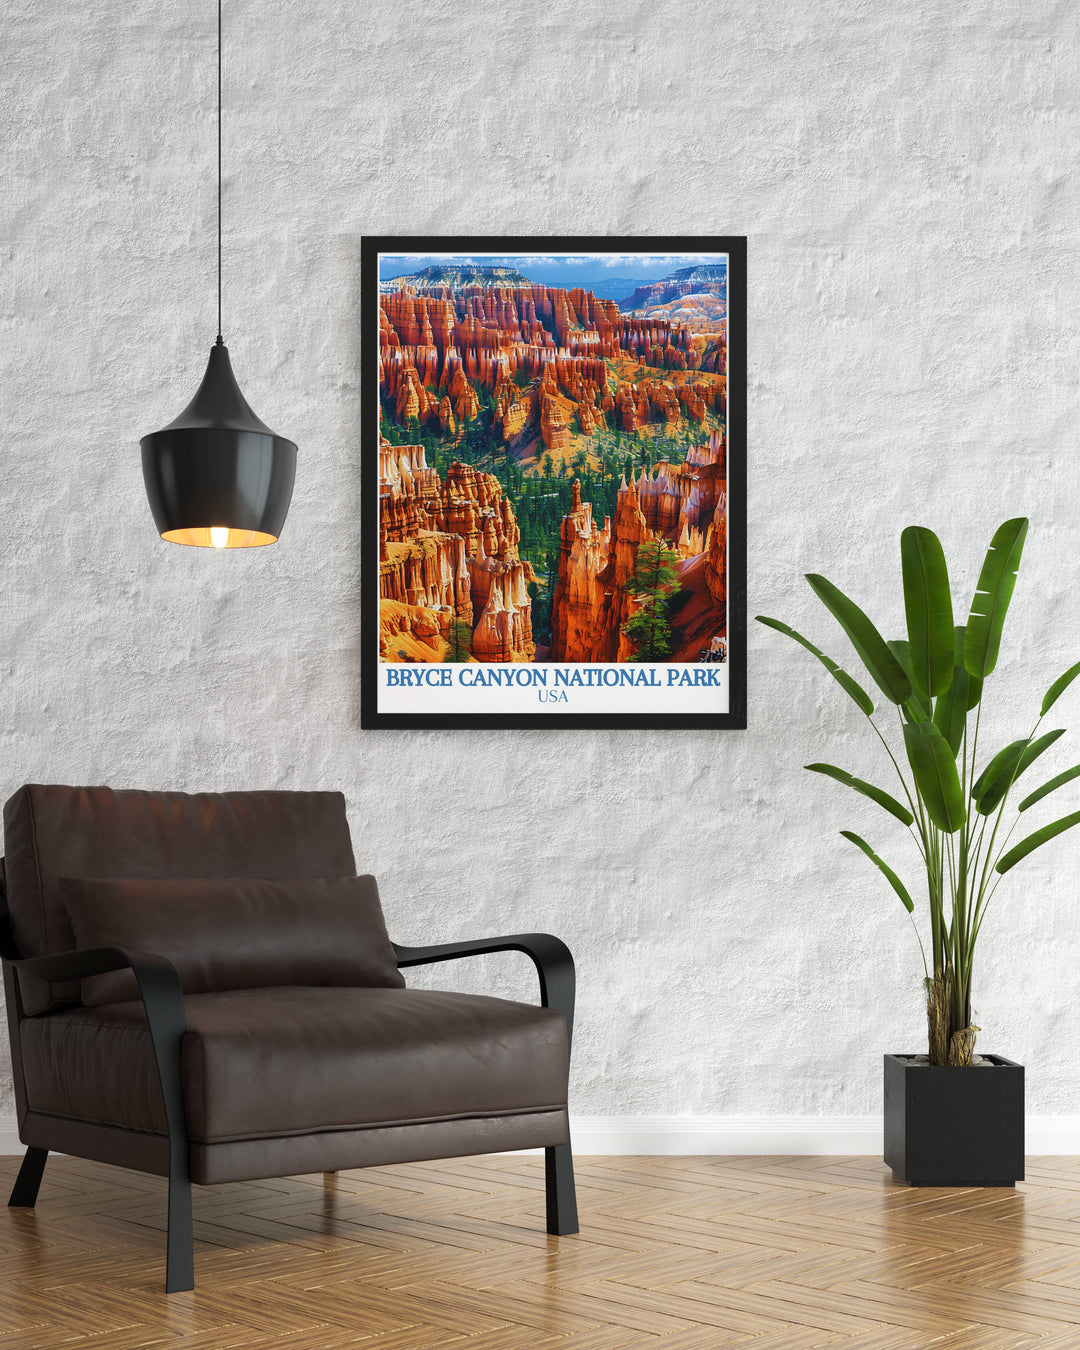 High quality Bryce Amphitheater prints bringing the beauty of Bryce Canyon into your home. Perfect for nature lovers and adventurers. Available as a digital download for convenient at home printing and immediate enjoyment